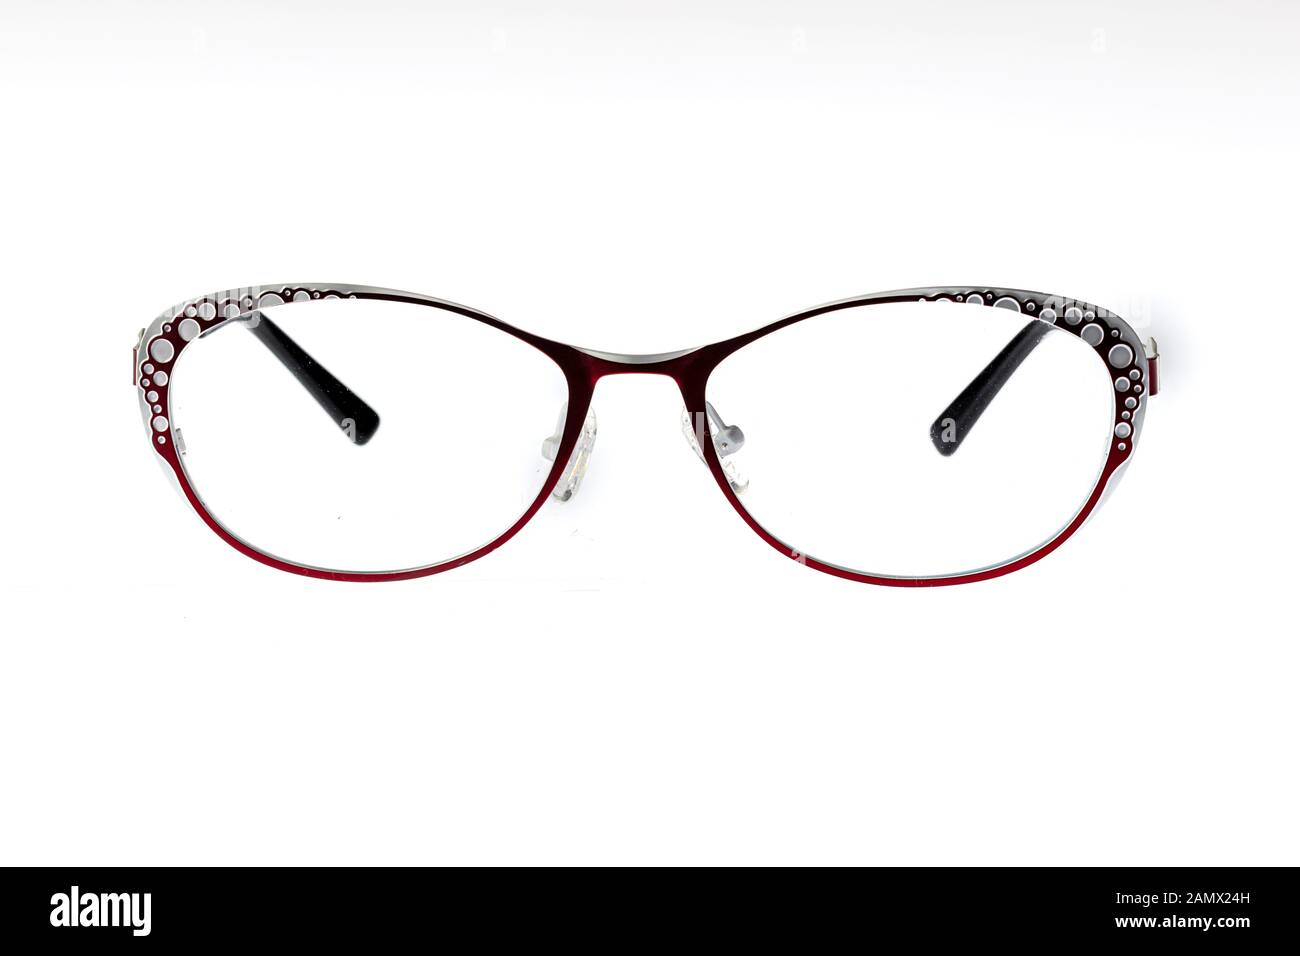 Eyeglasses red framed on white background with soft focus. Stock Photo